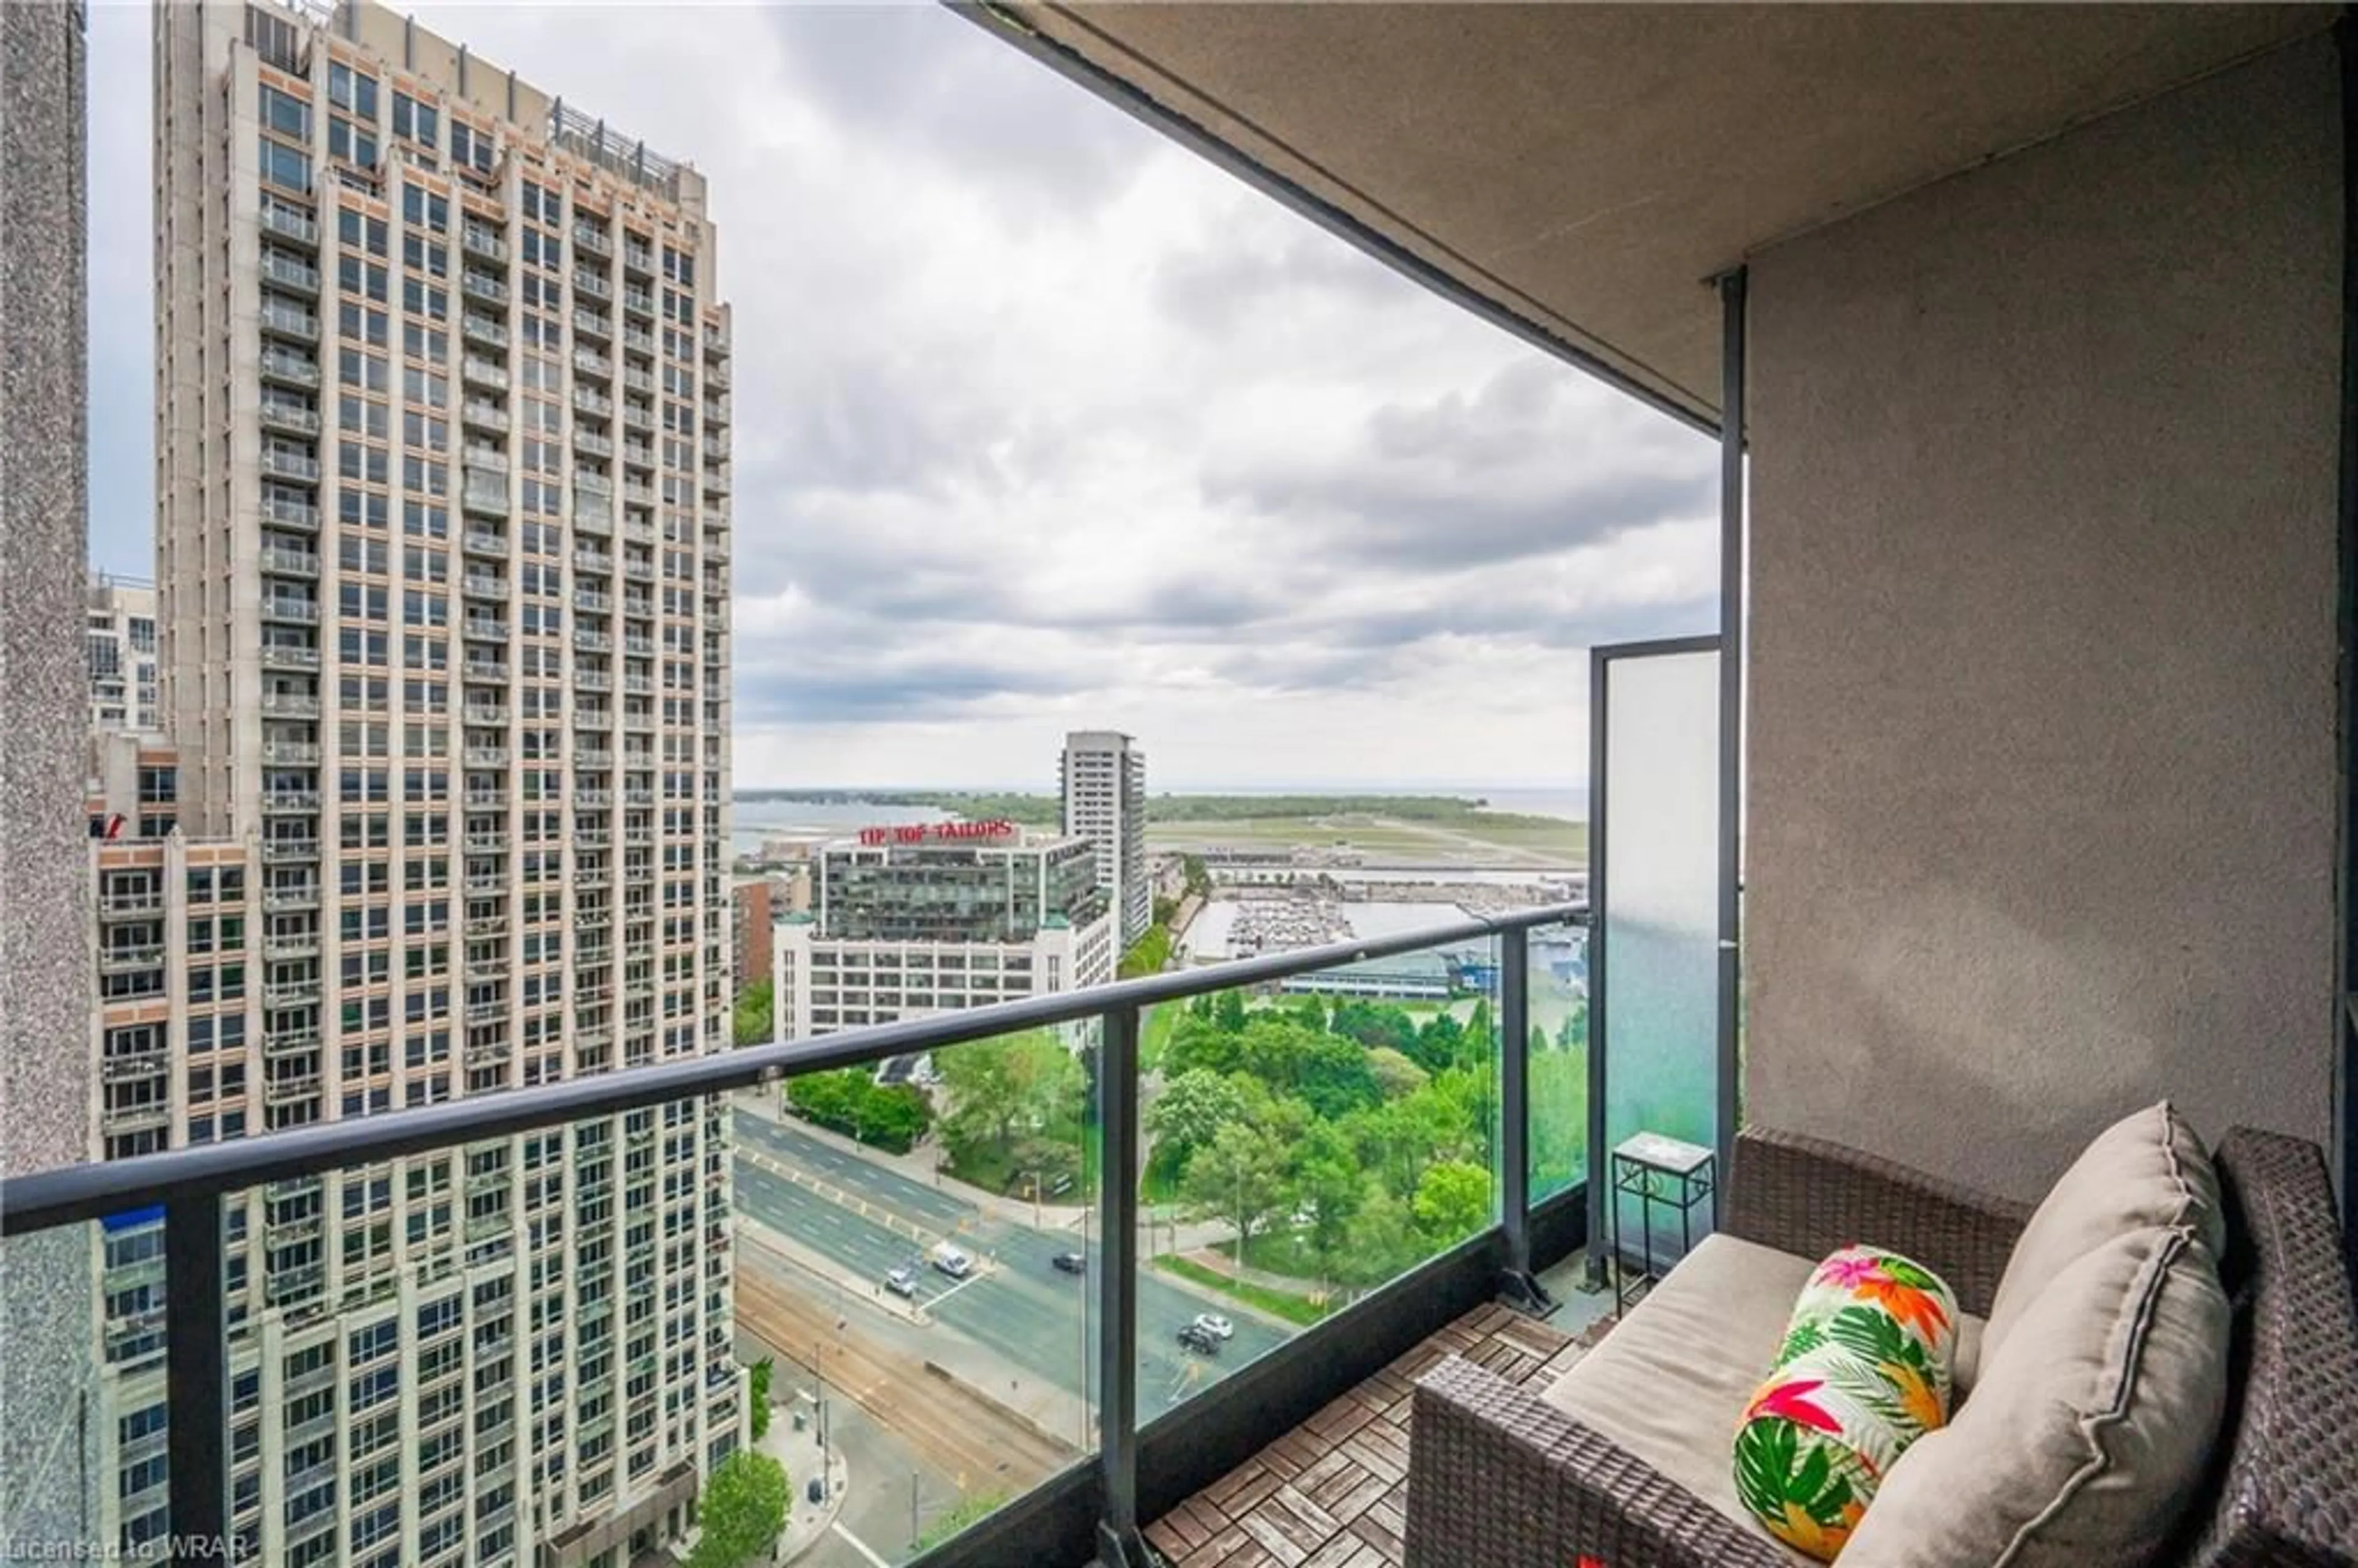 Balcony in the apartment for 215 Fort York Blvd #2201, Toronto Ontario M5V 4A2